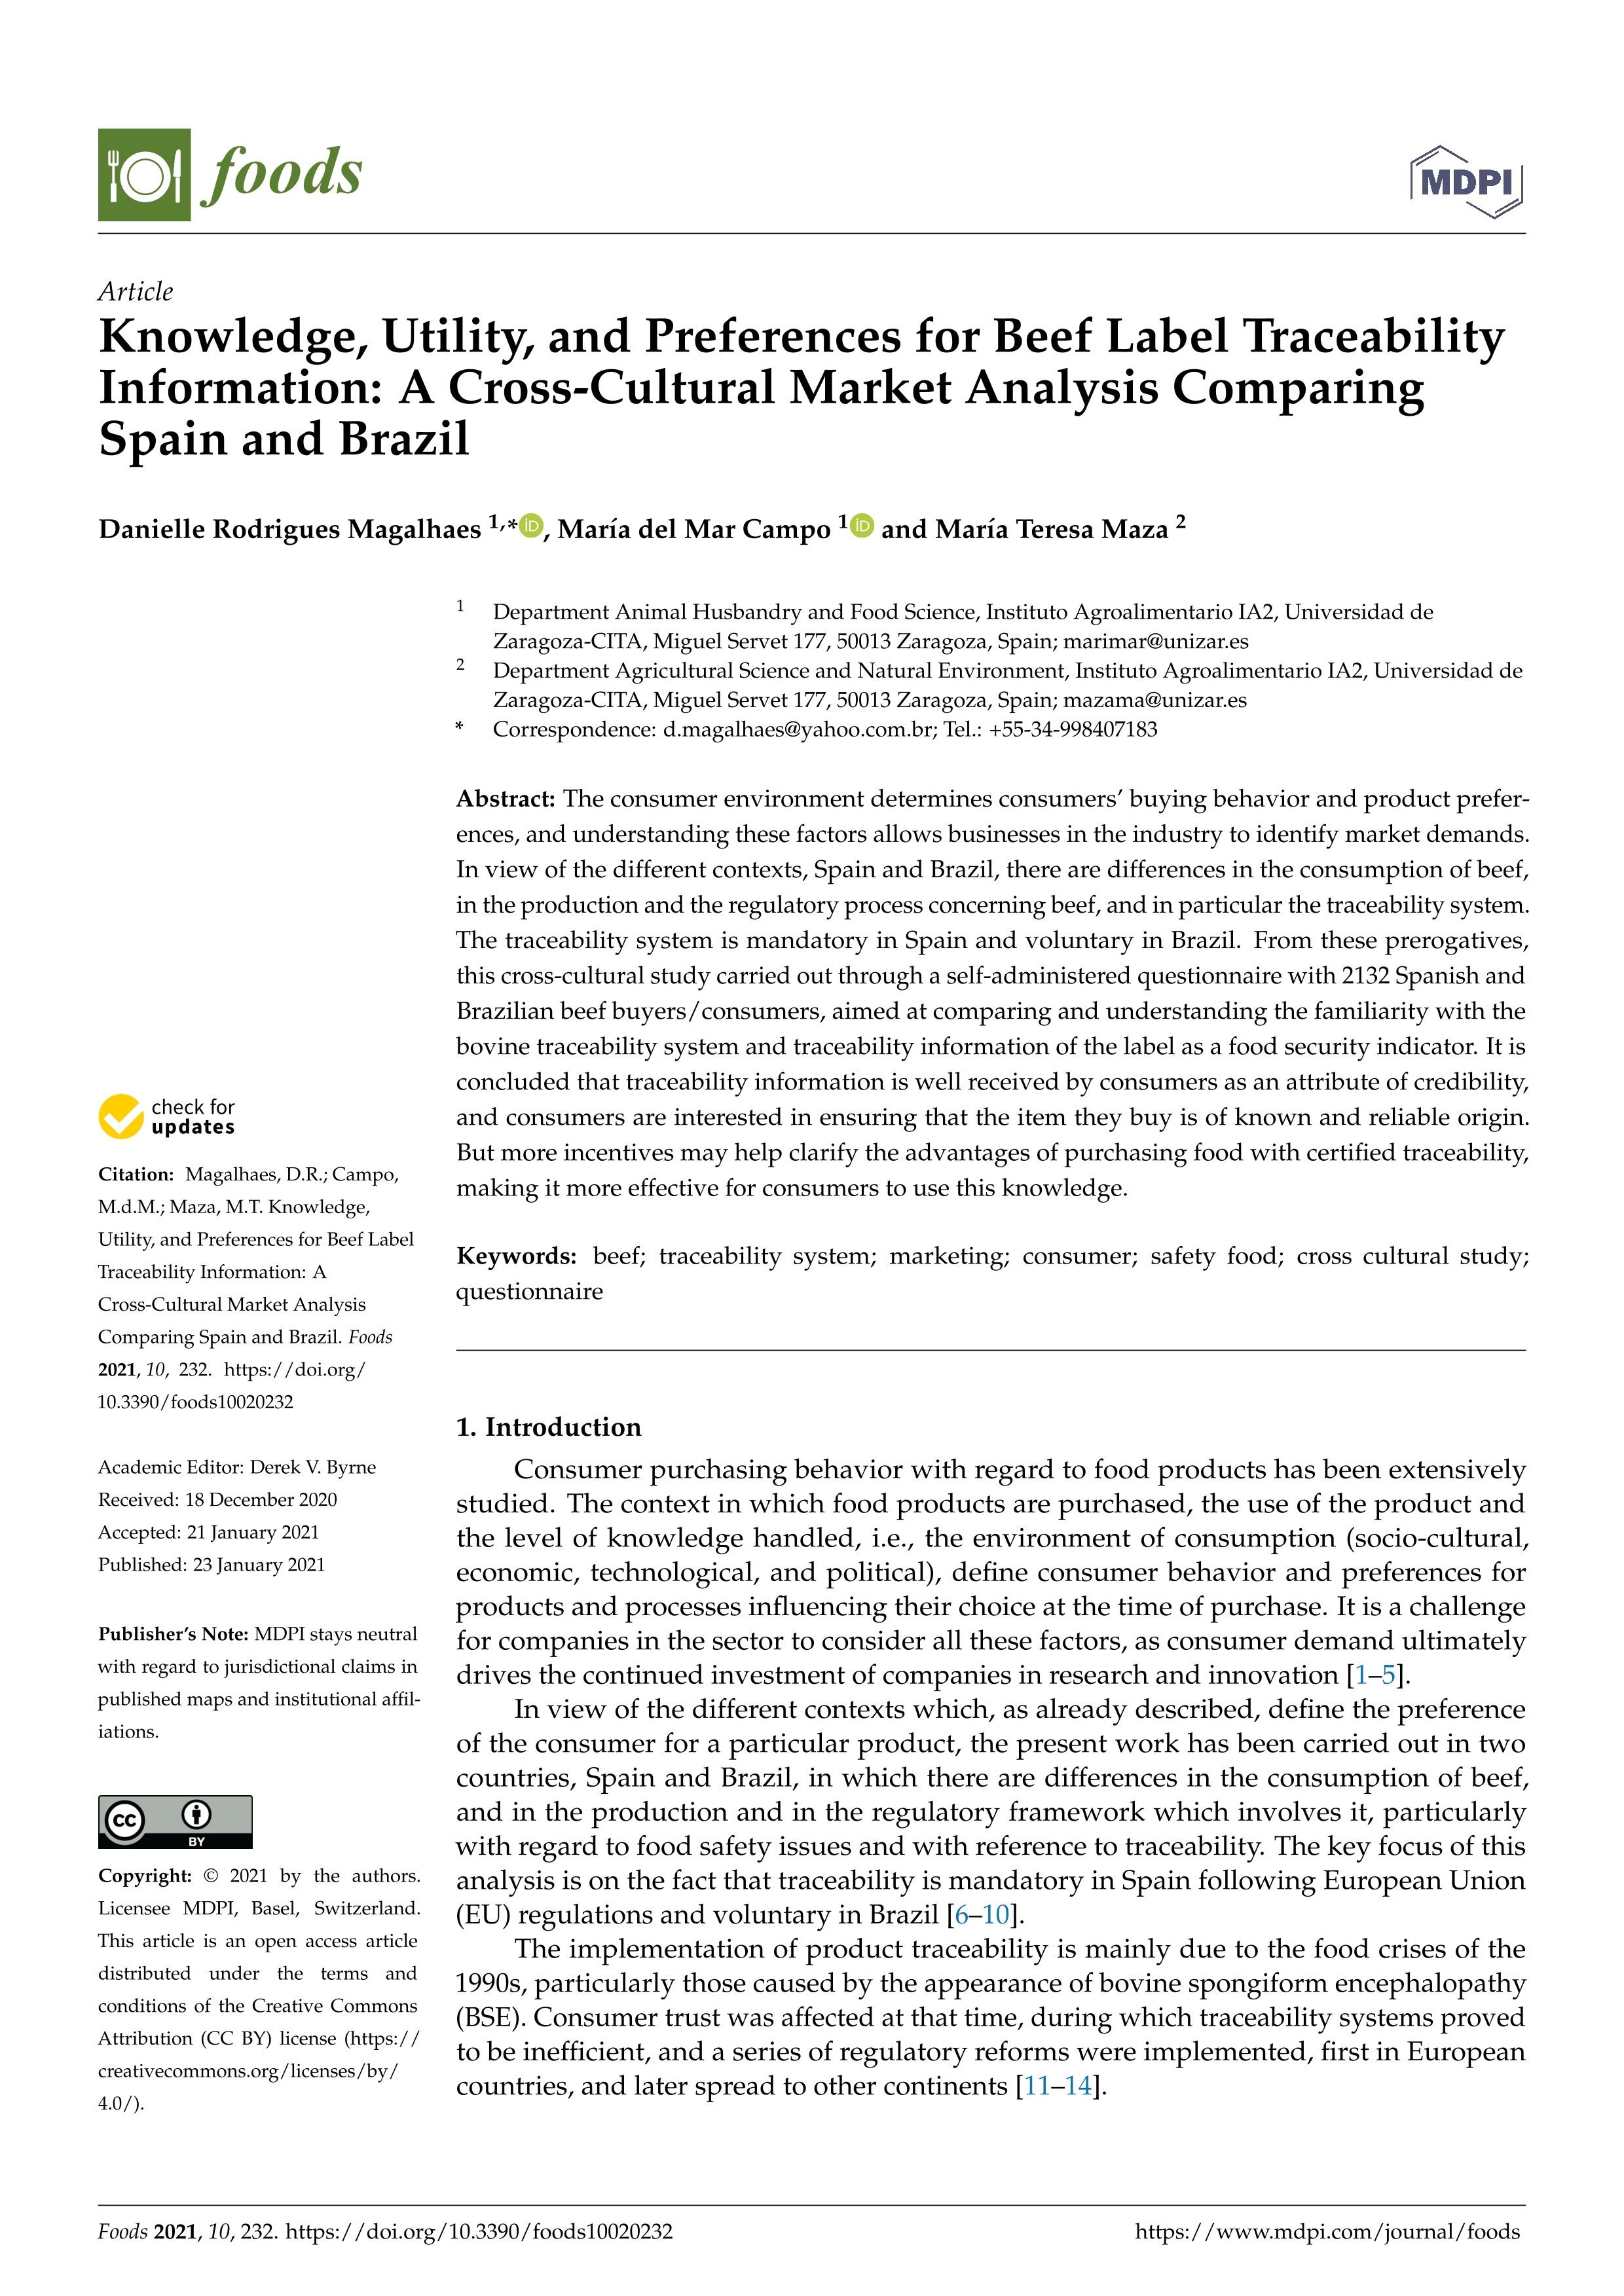 Knowledge, utility and preferences for beef label traceability information: A cross-cultural market analysis comparing Spain and Brazil.